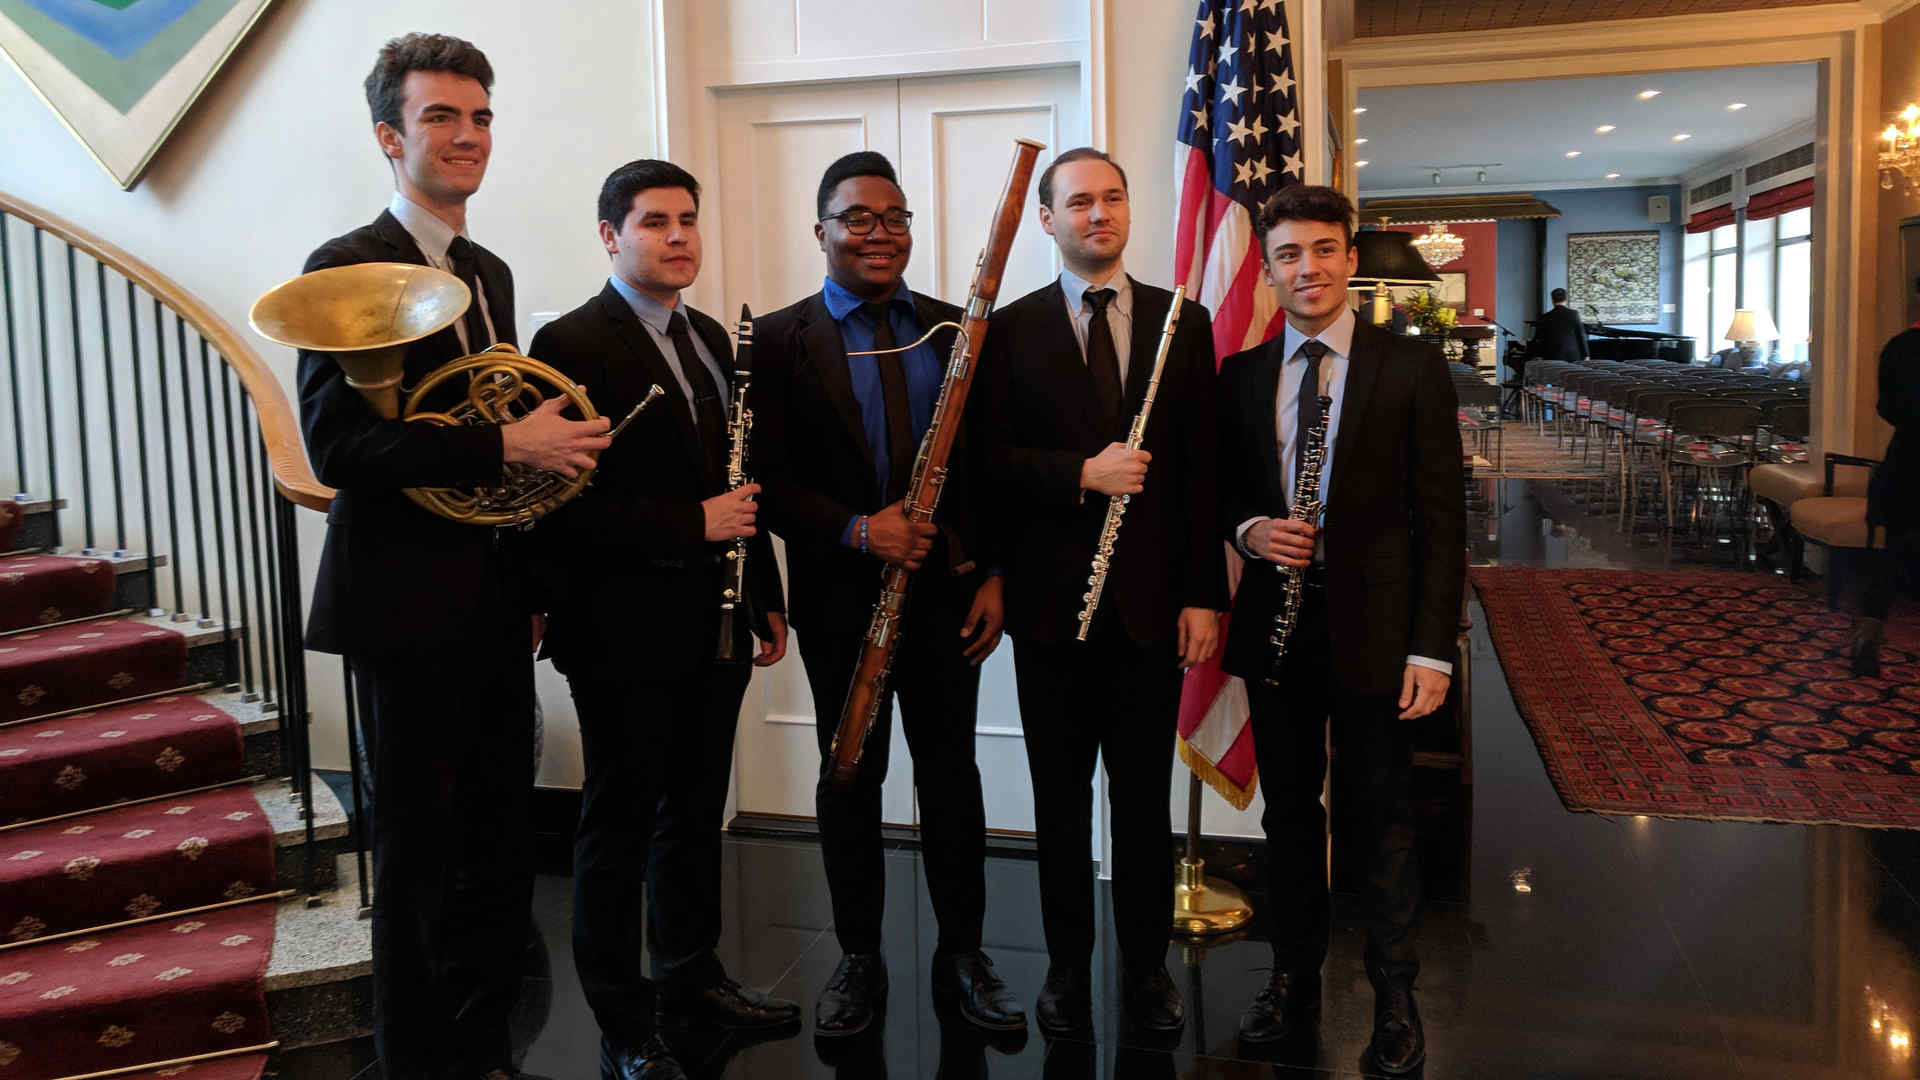 The quintet at the ambassador’s house